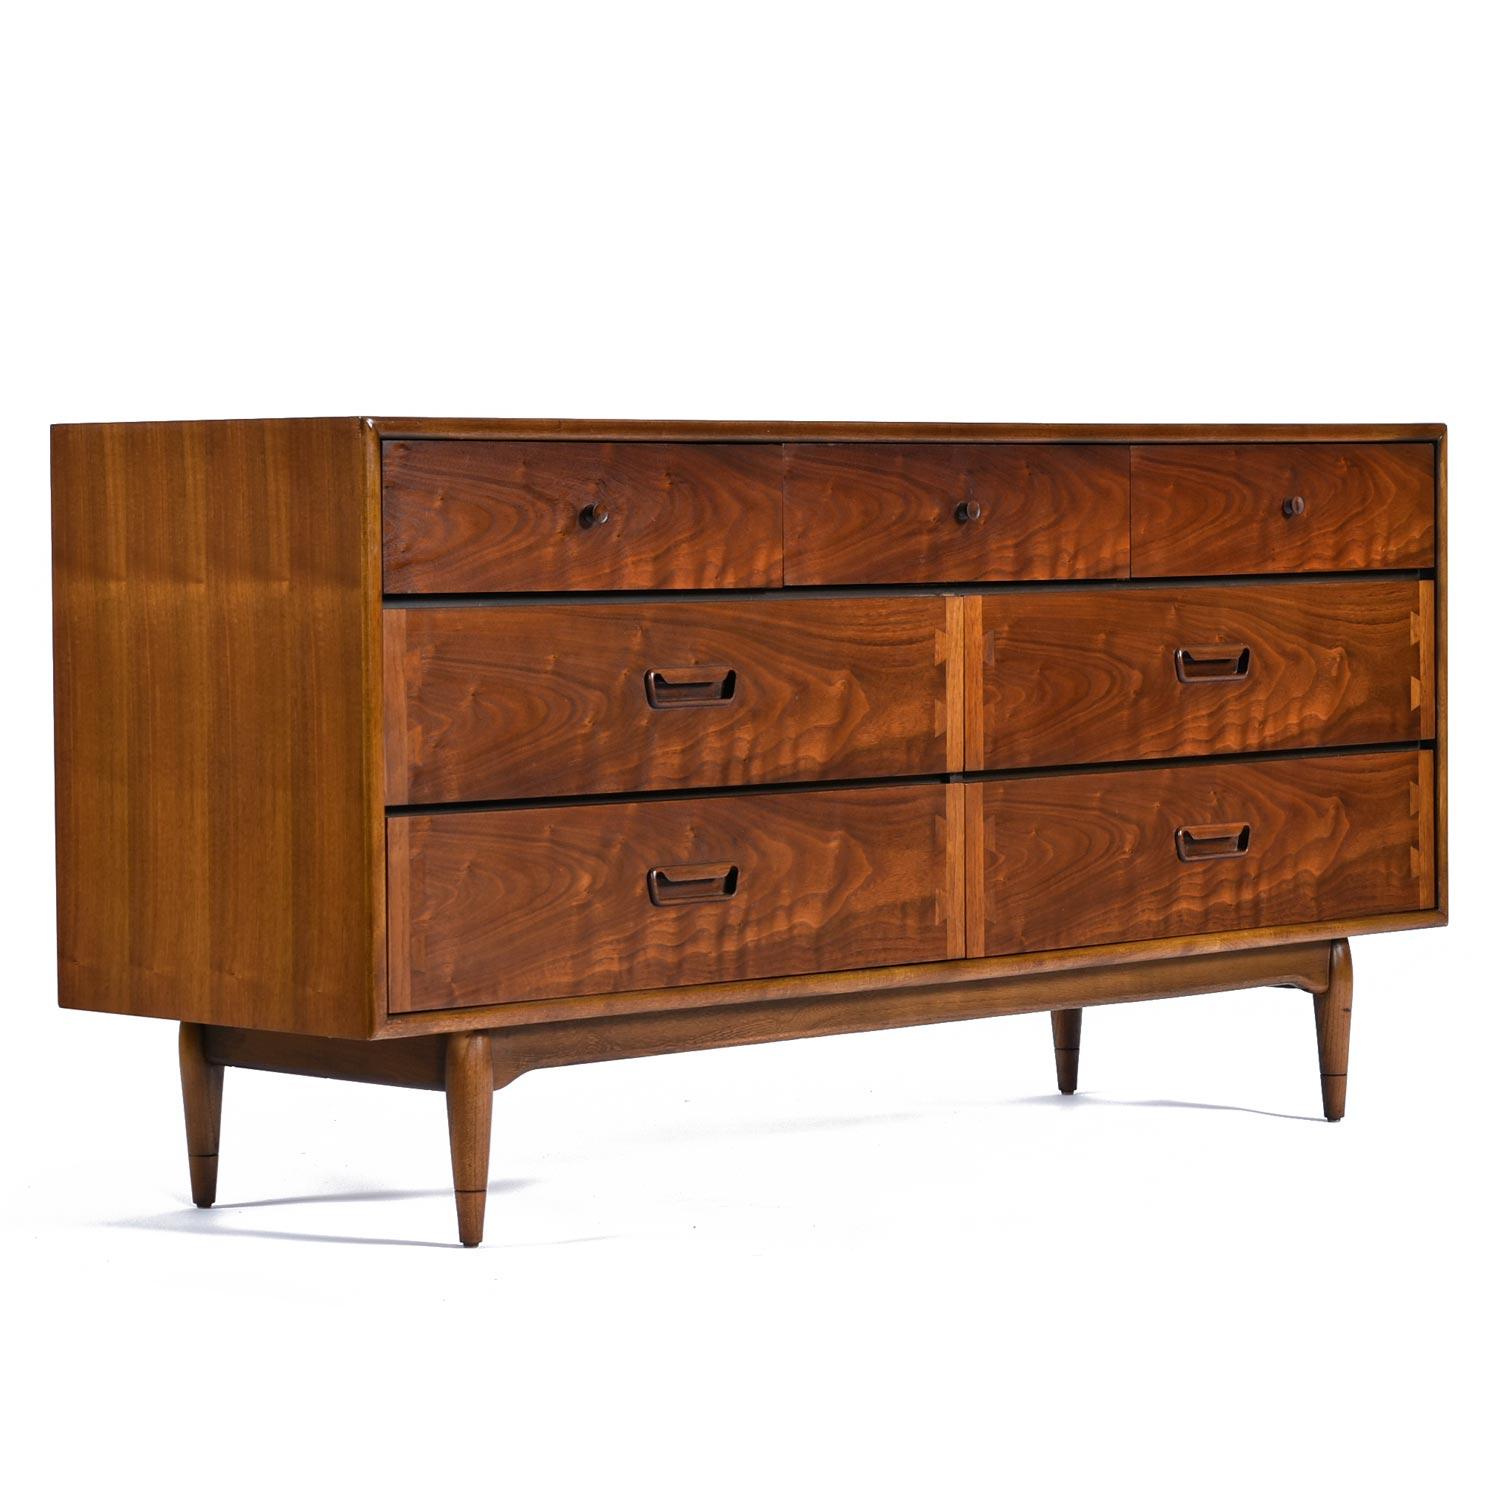 This is a seriously hard-to-find model. The Acclaim bedroom case pieces seldom come to market. After a decade in the MCM furniture business, this is the first one we’ve had on our showroom. Originally intended as a dresser, this piece can easily and